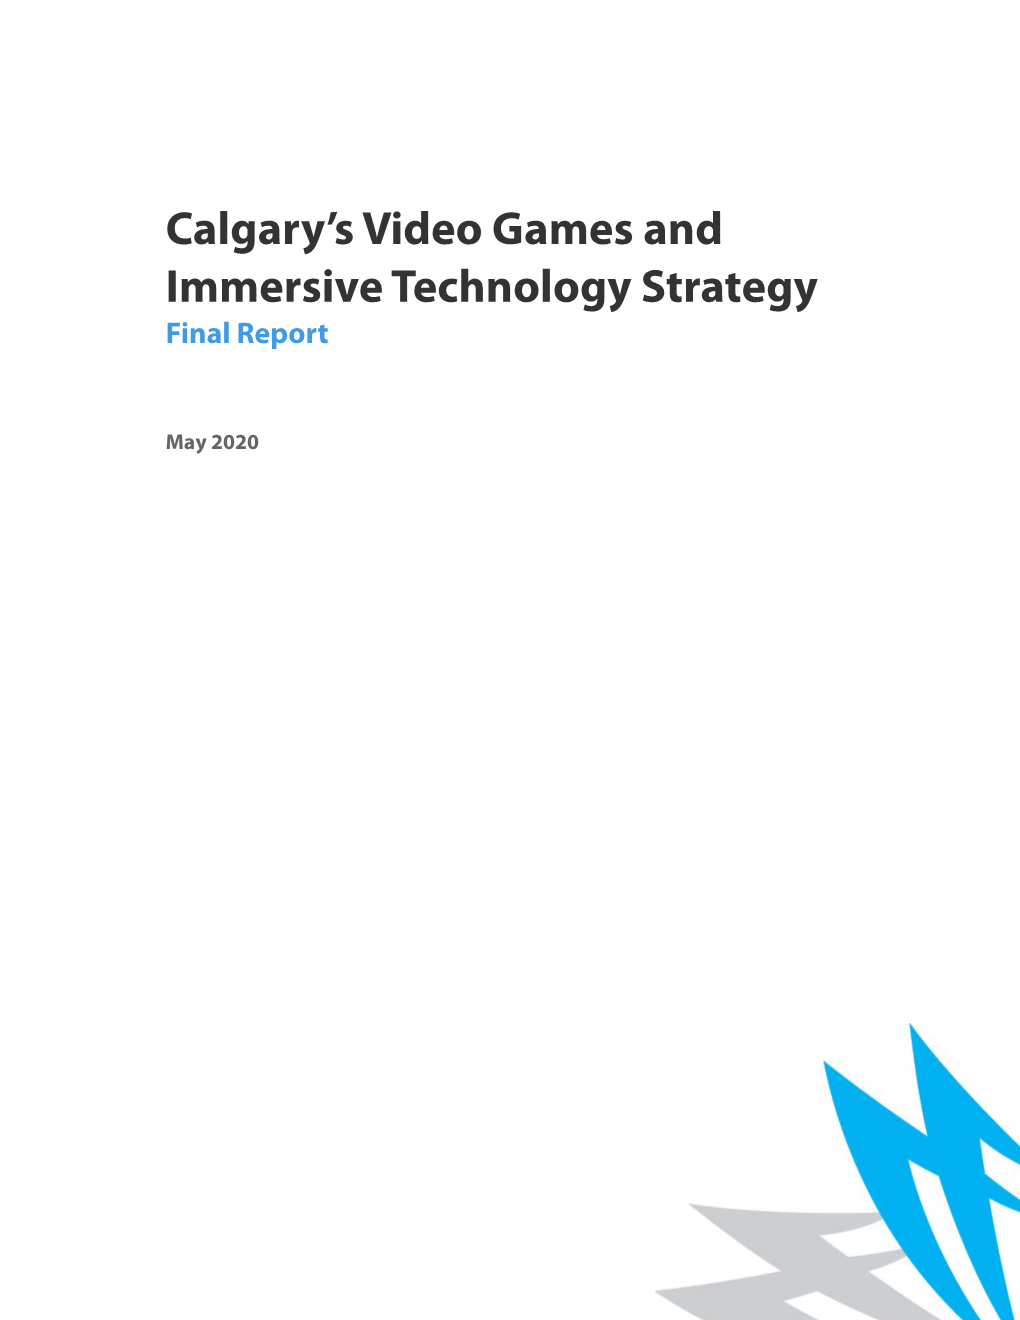 CED Video Games and Immersive Technology Strategy 2020